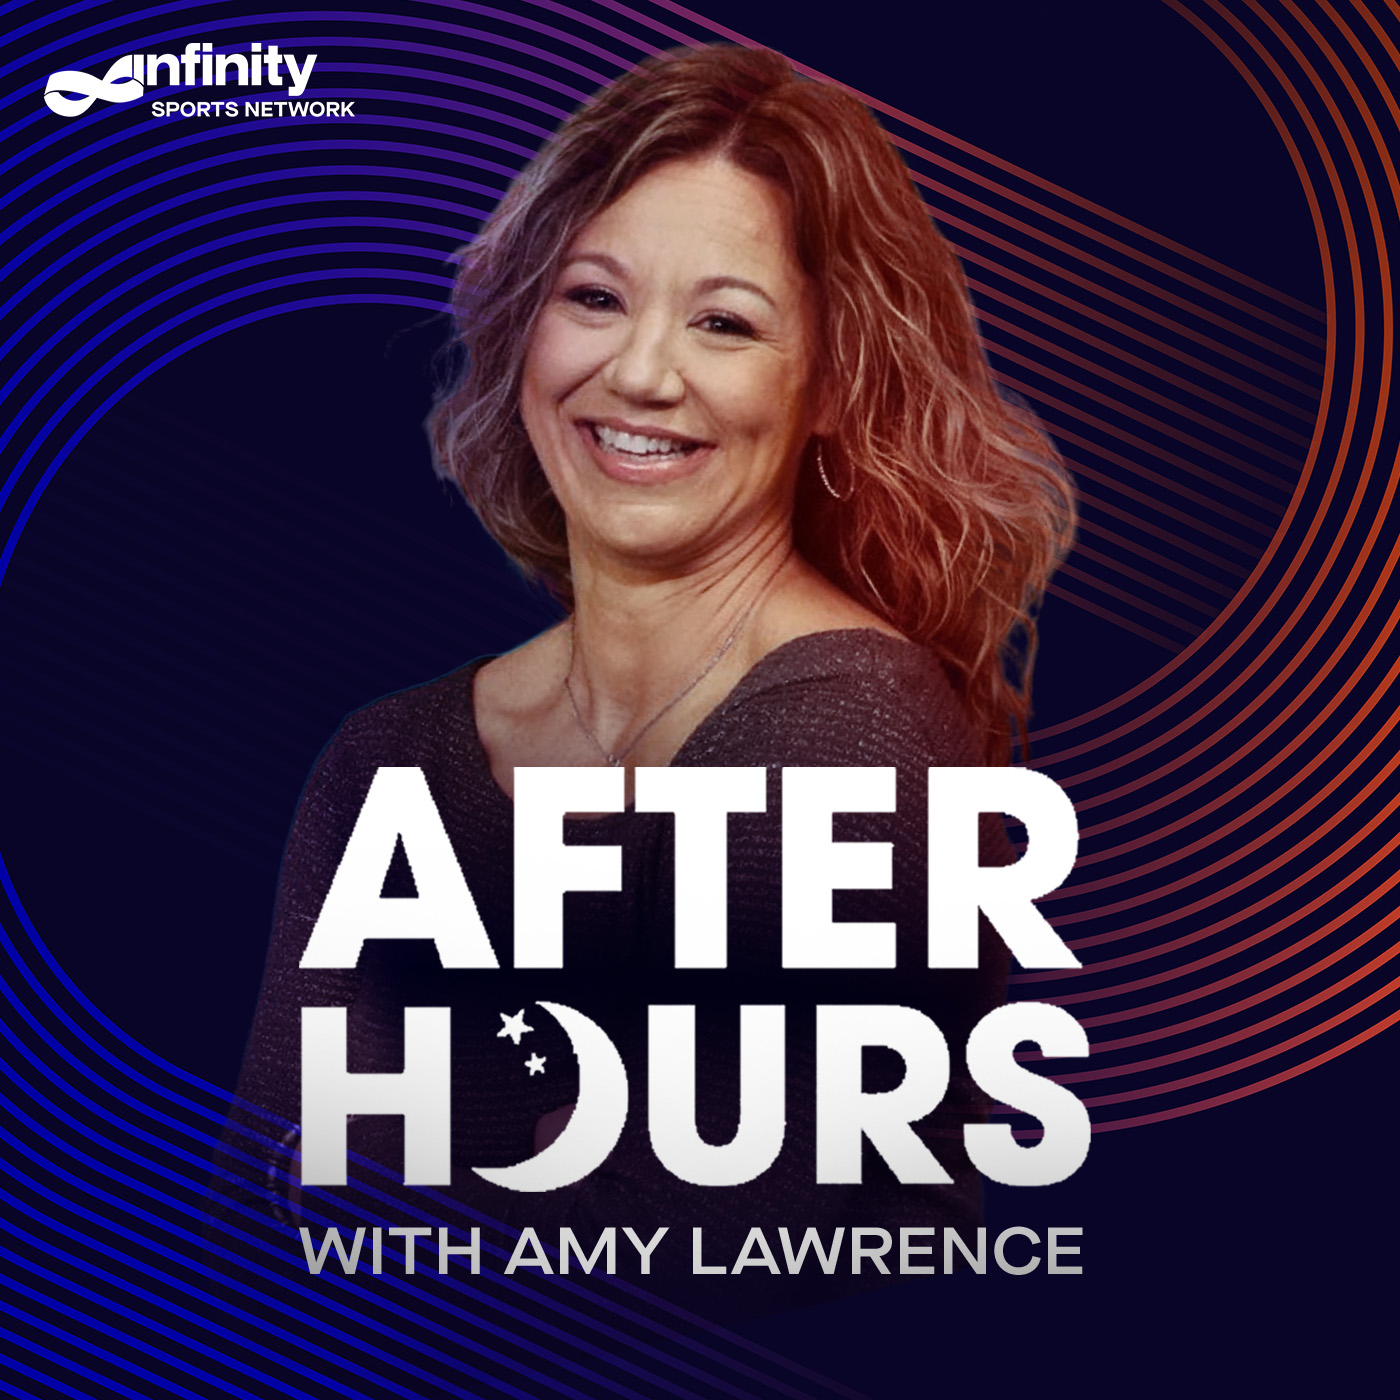 6/3/21 After Hours with Amy Lawrence PODCAST: Hour 2